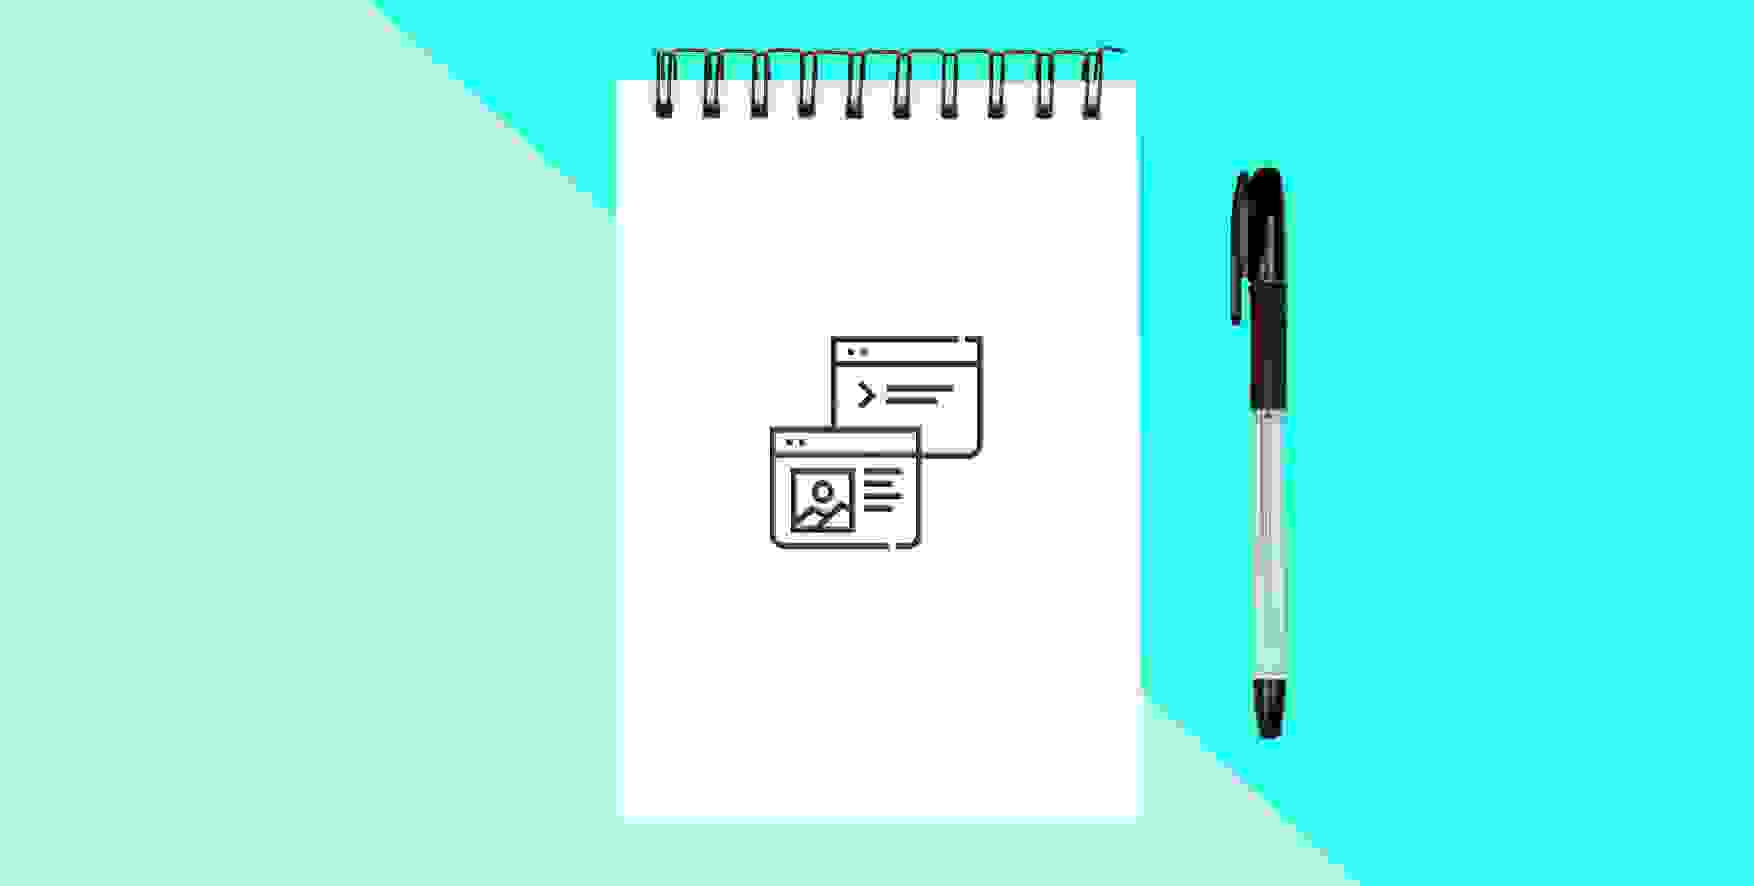 full-stack developer symbol on a piece of notepad